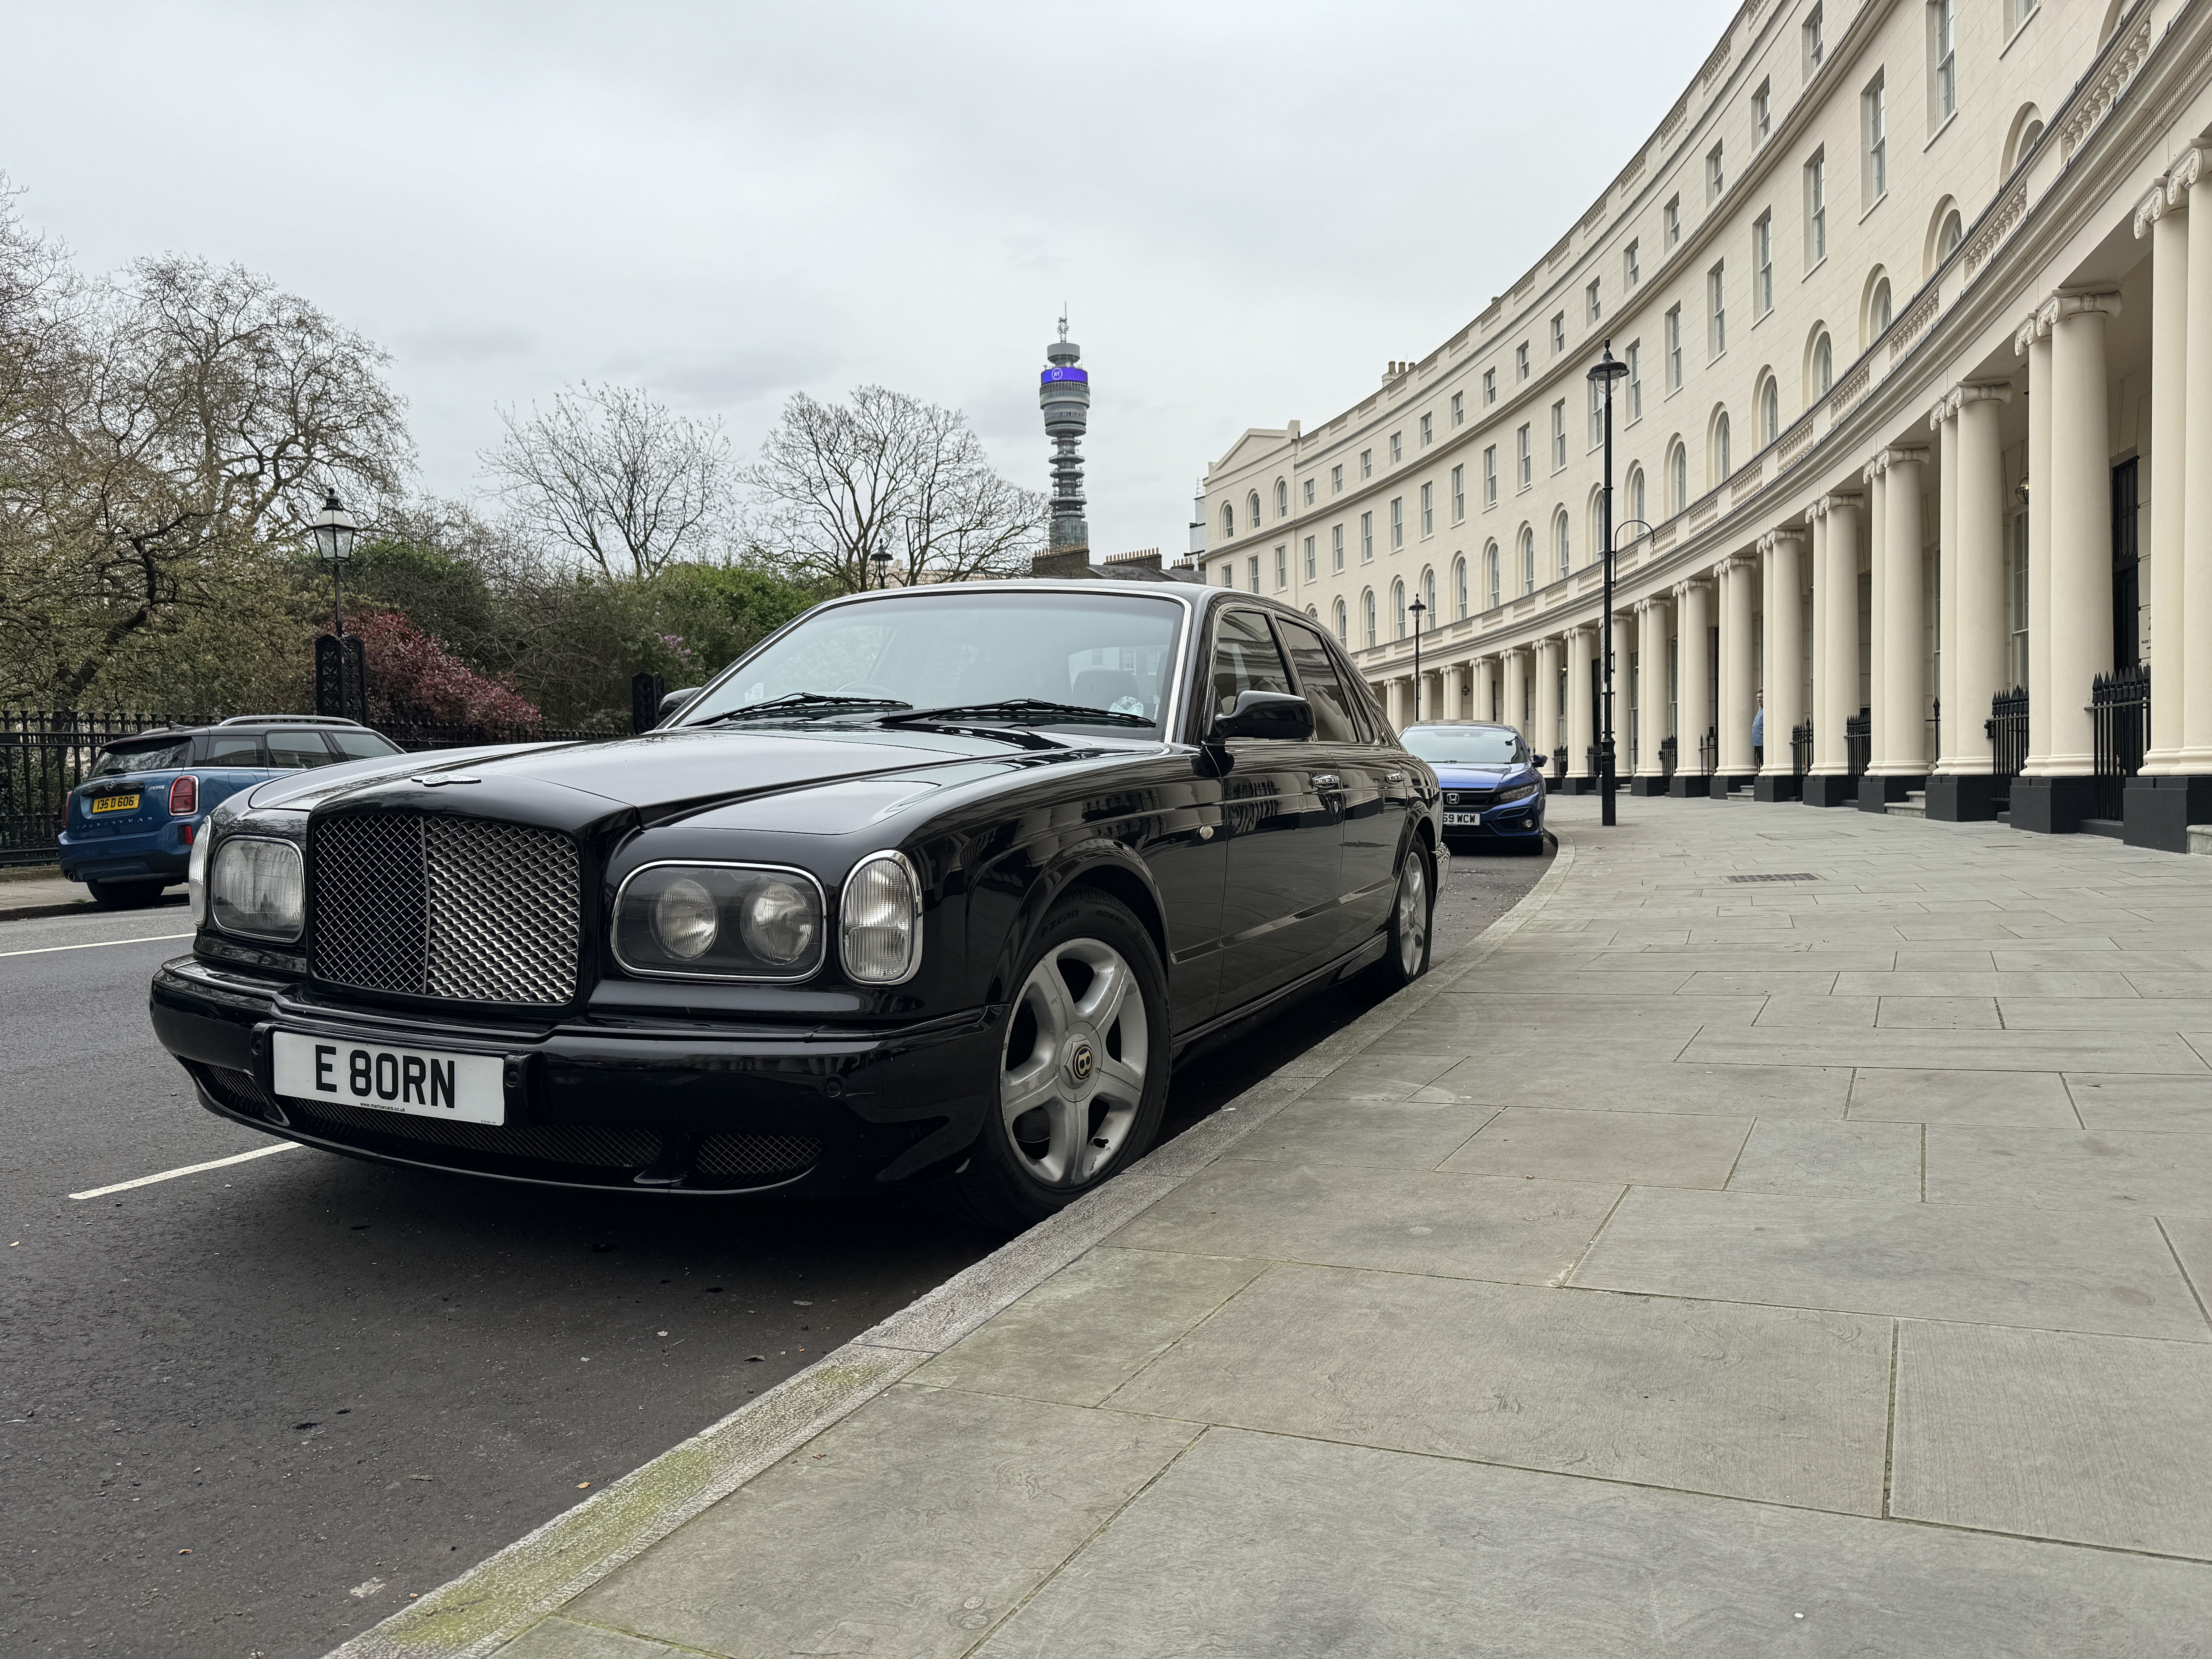 Bentley Arnage R, 6750cc V8 Twin Turbo, Black coachwork with matching black leather upholstery and - Image 22 of 78